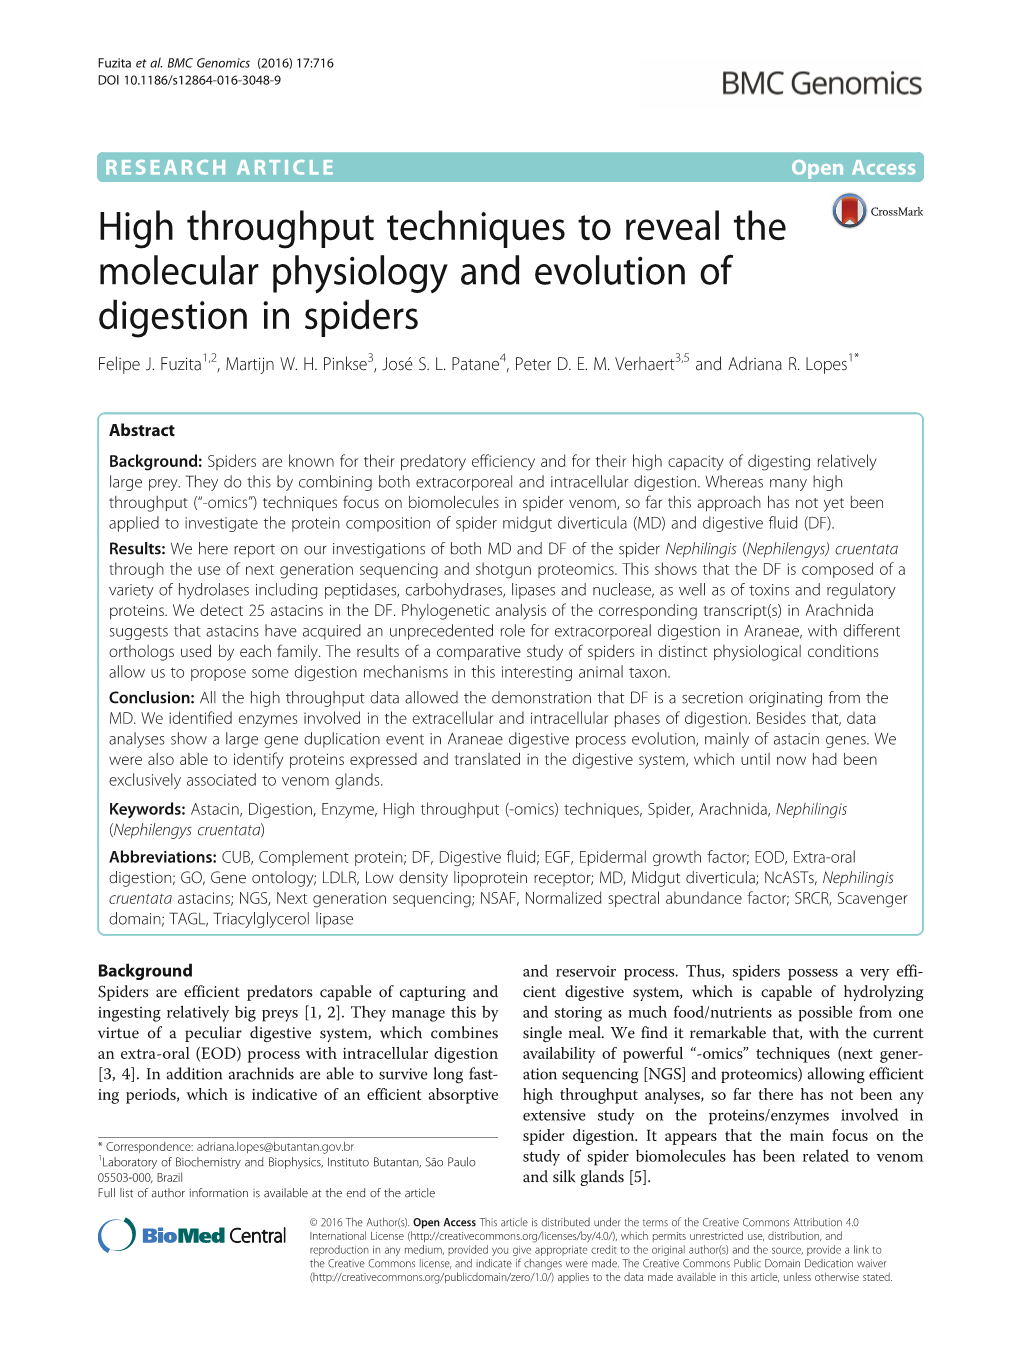 High Throughput Techniques to Reveal the Molecular Physiology and Evolution of Digestion in Spiders Felipe J